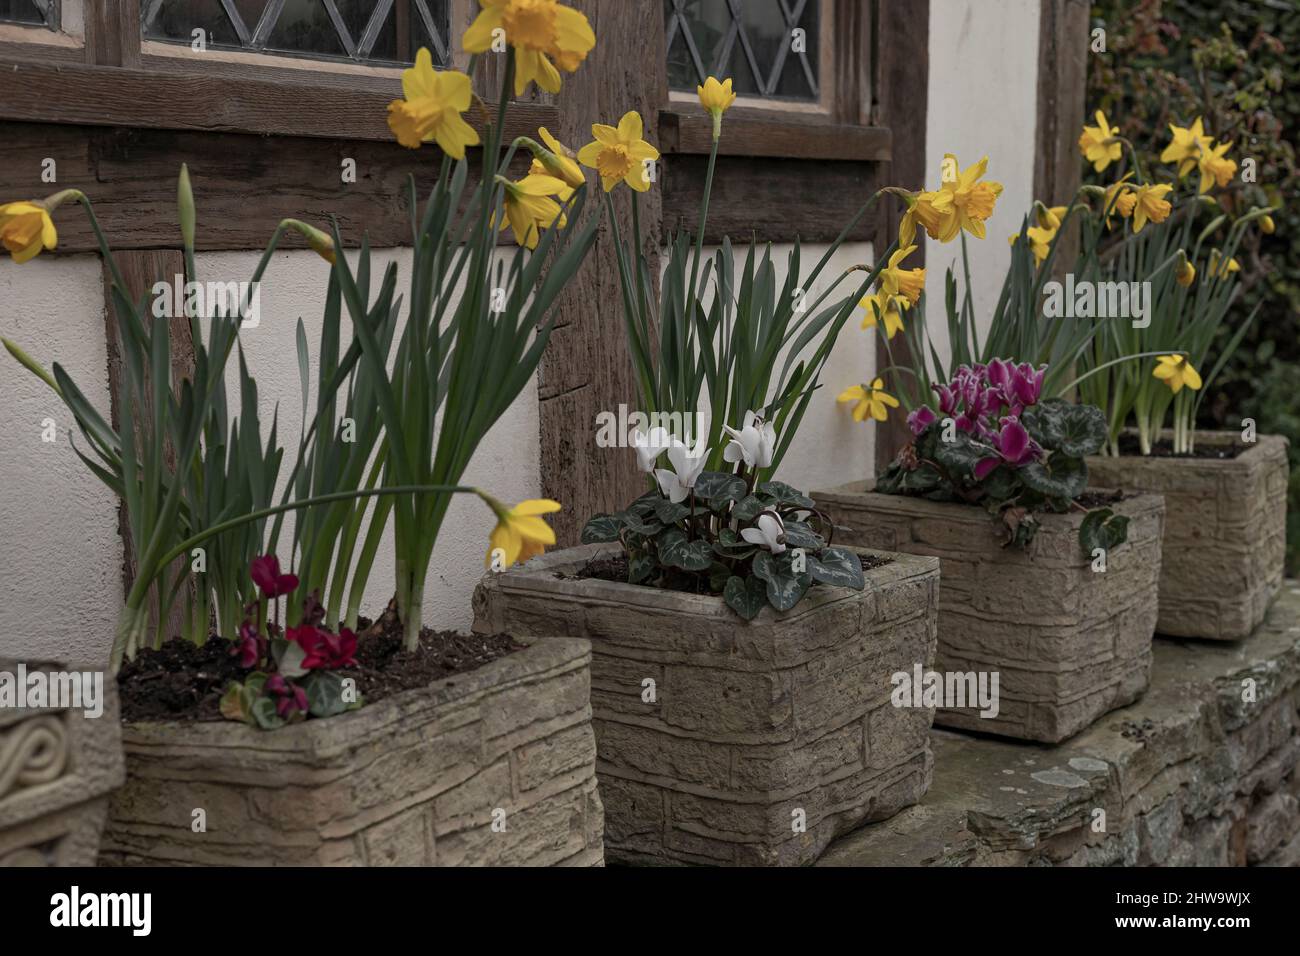 Stone troughs with spring flowers including narcissus, daffodils, cyclamen on a wall all blooming in the early spring weather Stock Photo